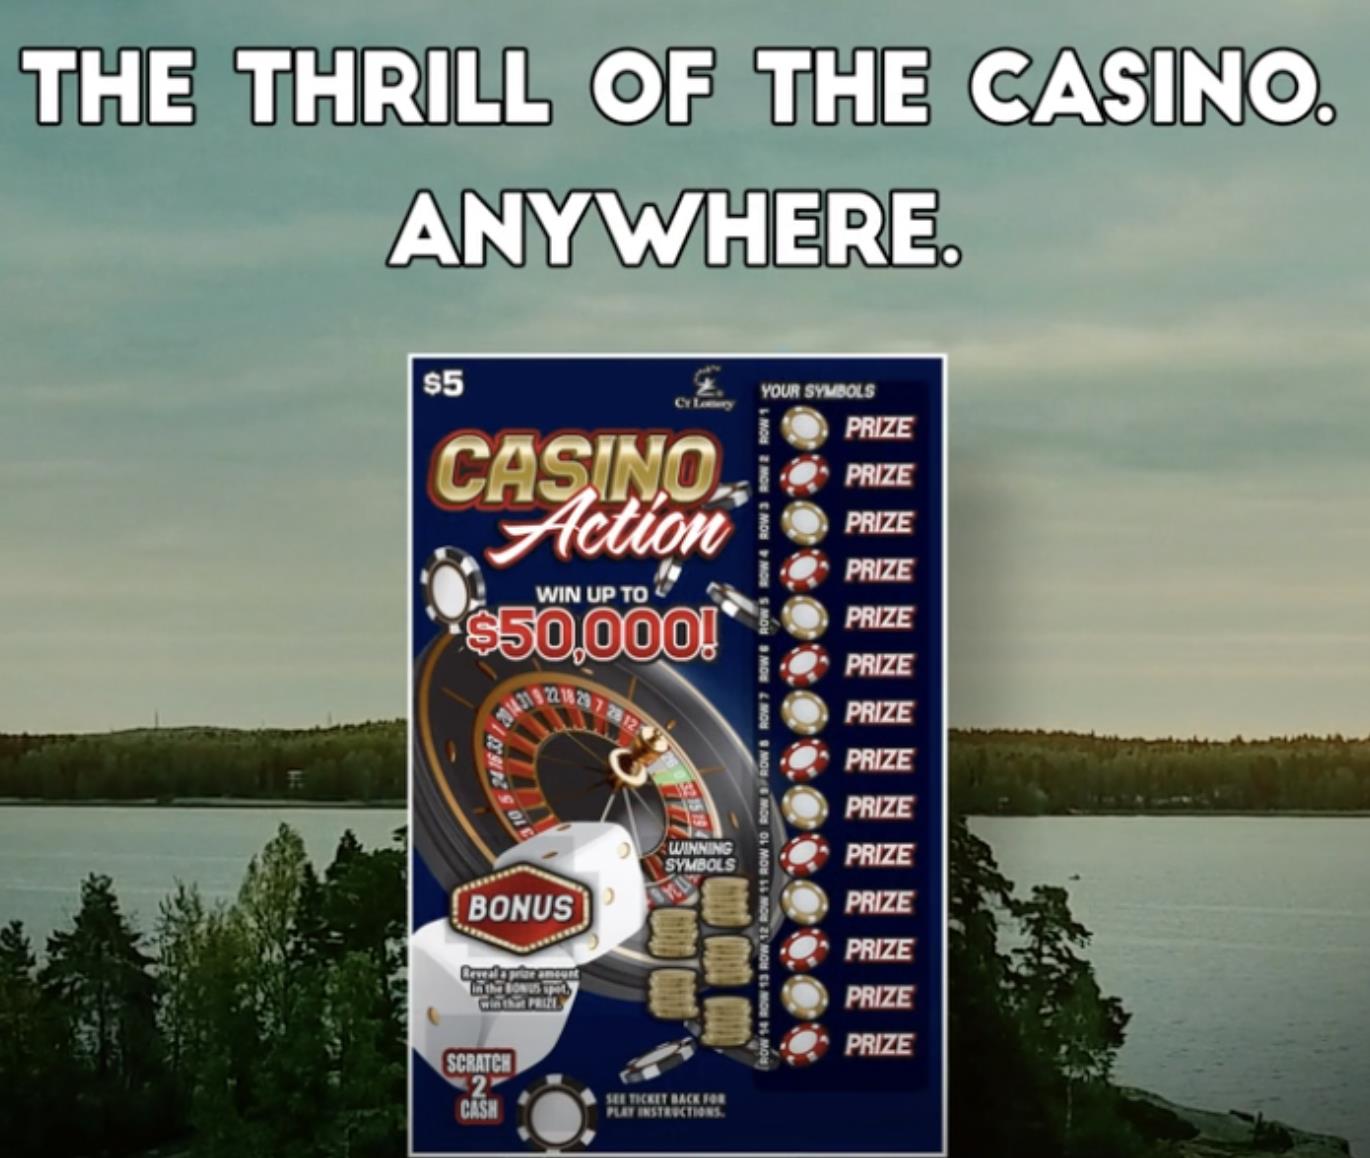 Experience The Thrill of the Casino Anywhere with Casino Action From the Connecticut Lottery – Marketing Communication News